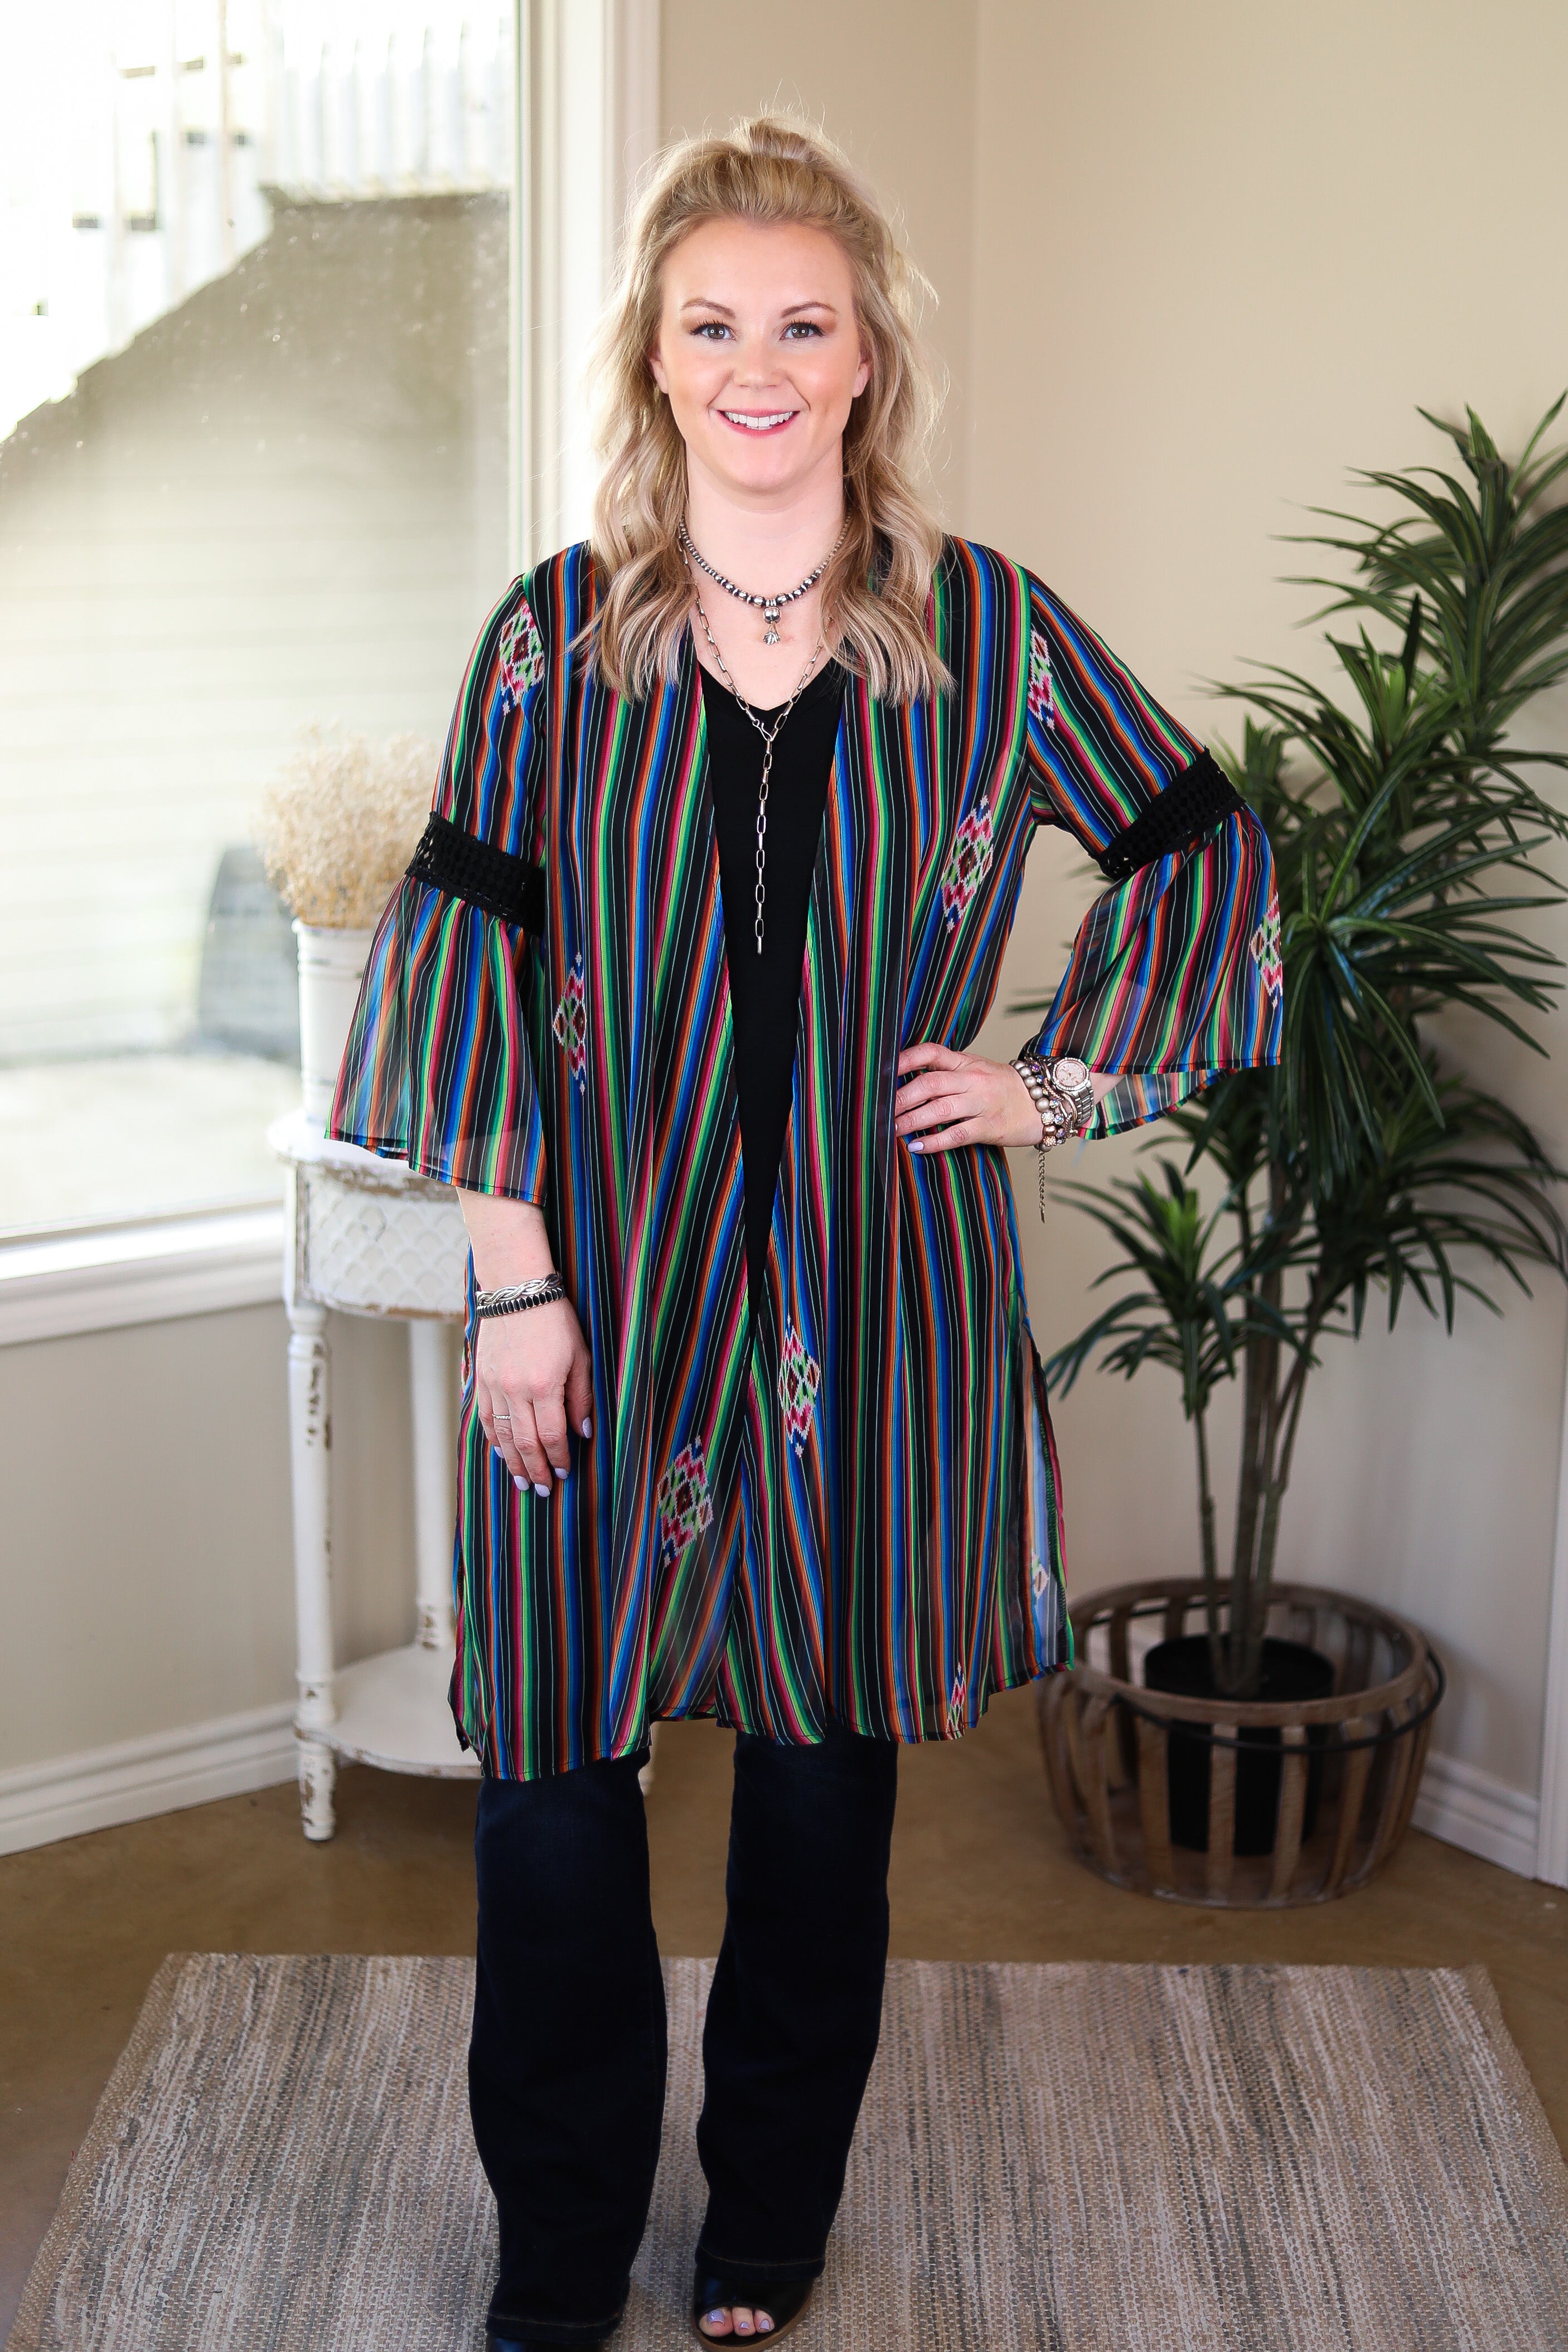 Last Chance Size S/M | Command Attention Striped Kimono with Crochet Detailing in Black - Giddy Up Glamour Boutique